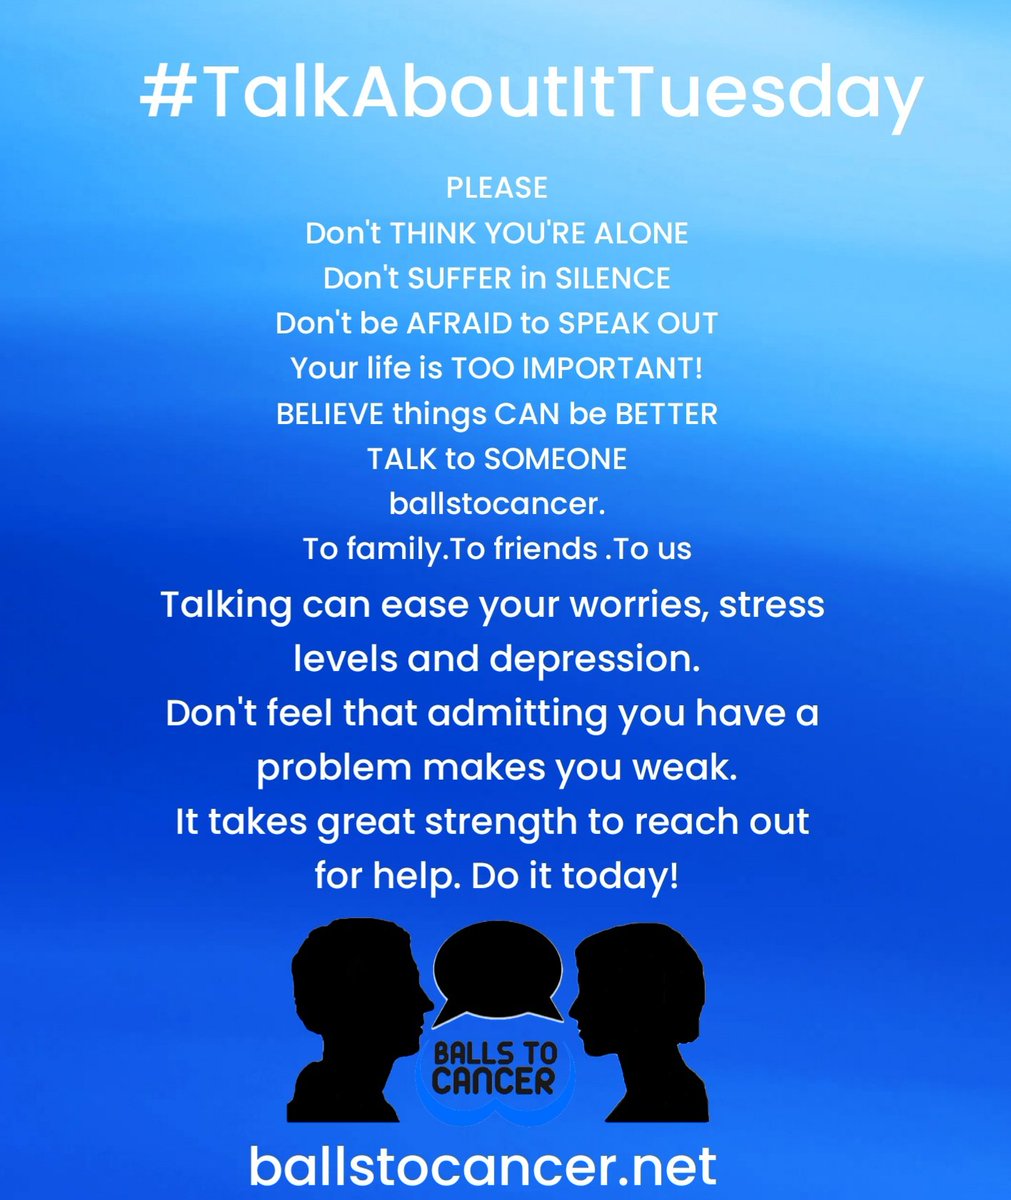 Its #TalkAboutit Tuesday. We can't shout it enough that talking can ease your worries, stress & depression. Don't feel that admitting you have a problem makes you weak. It take great strength to reach out for help. Do it today. We're always here to listen #ballstocancer